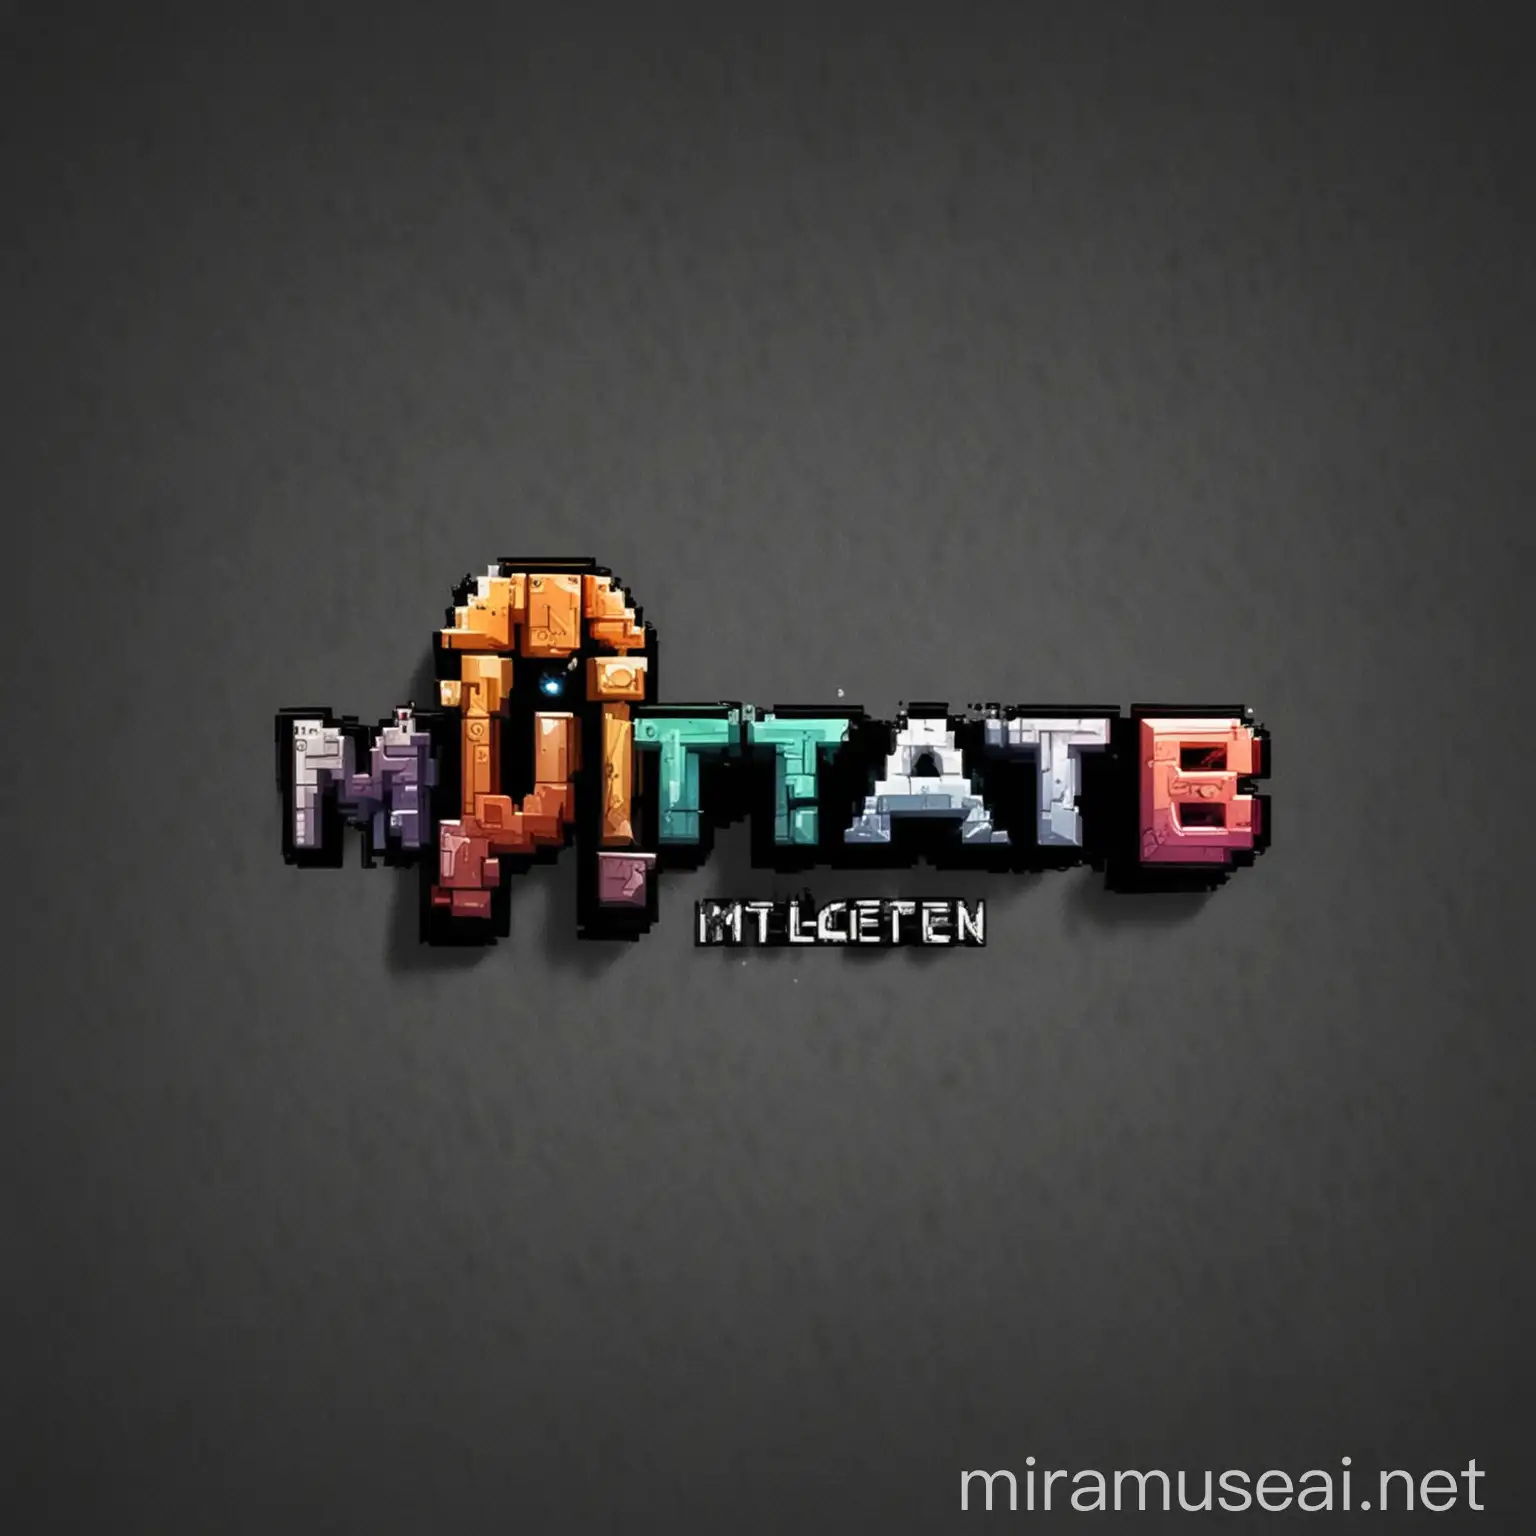 I want to make a logo for my name Muttayab Interactive"? This name suggests that your production house is involved in creating interactive and engaging gaming experiences. For the logo, you could design the letters of your name to resemble game controllers or incorporate elements like pixels or game characters to reflect the gaming aspect of your business.make 5 different logos